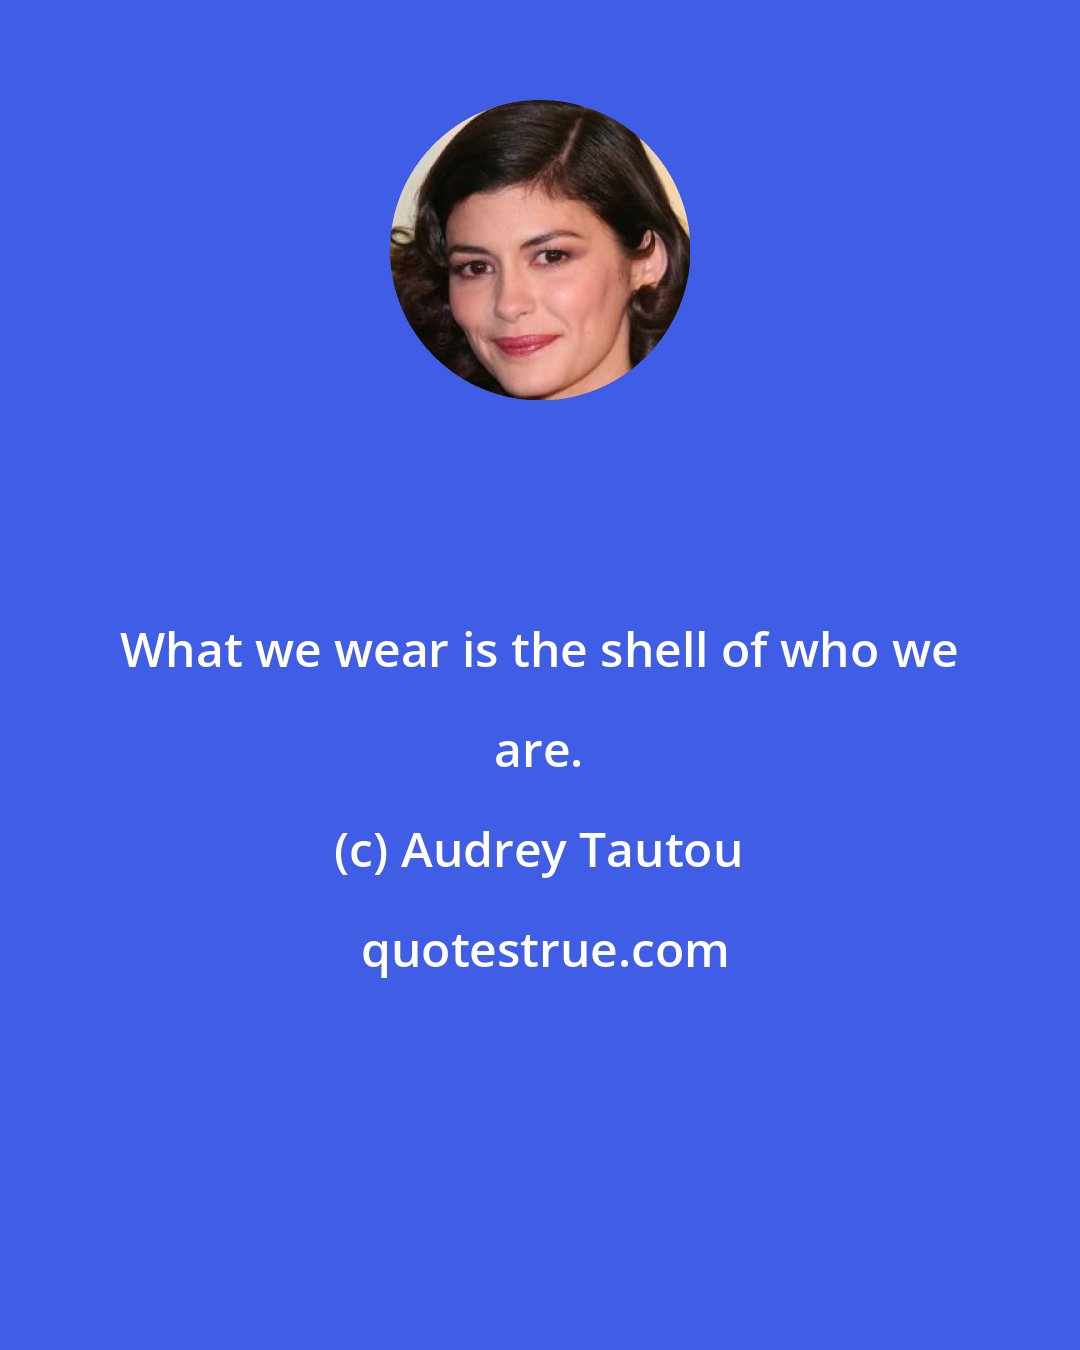 Audrey Tautou: What we wear is the shell of who we are.